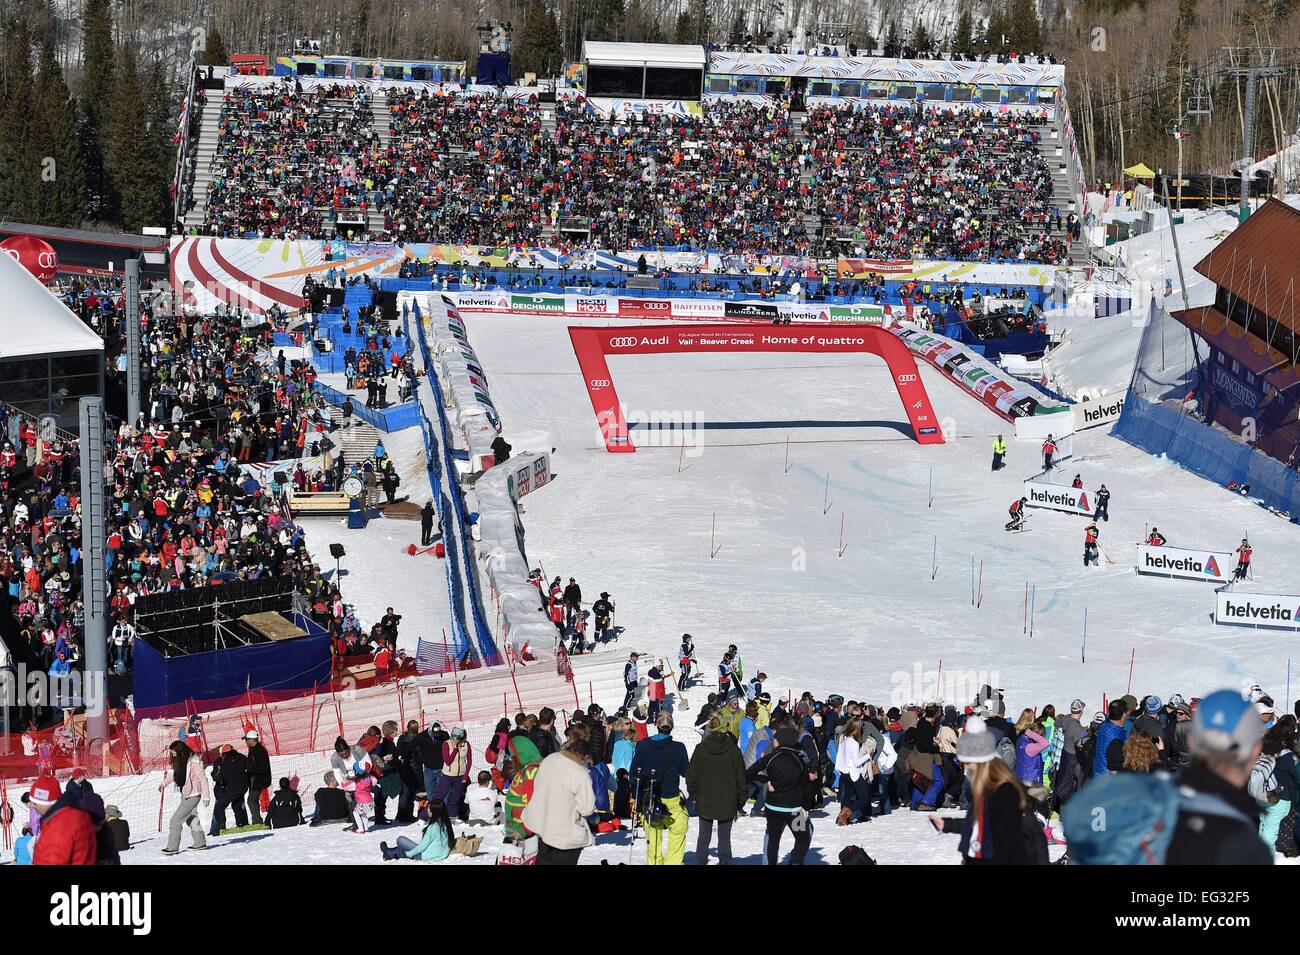 Beaver Creek, Colorado, USA. 14th Feb, 2015. Spectators in the Red Tail Stadium at the FIS Alpine World Ski Championships in Beaver Creek, Colorado, USA, 14 February 2015. The World Championships run from 02 February through 15 February. Photo: Frank May/picture alliance/dpa/Alamy Live News Stock Photo